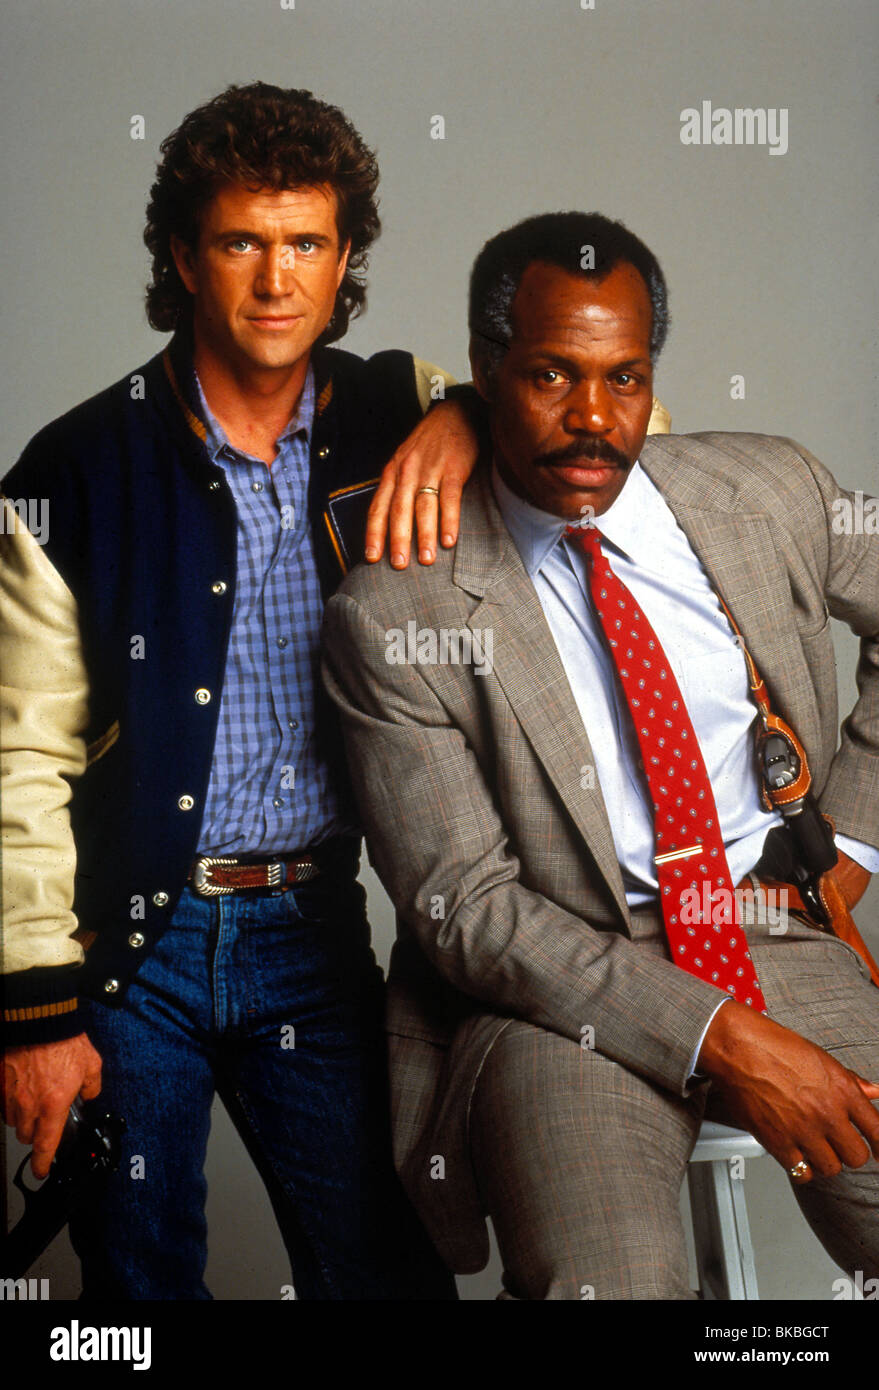 LETHAL WEAPON 2 (1989) MEL GIBSON, DANNY GLOVER LW2 002 Stockfoto